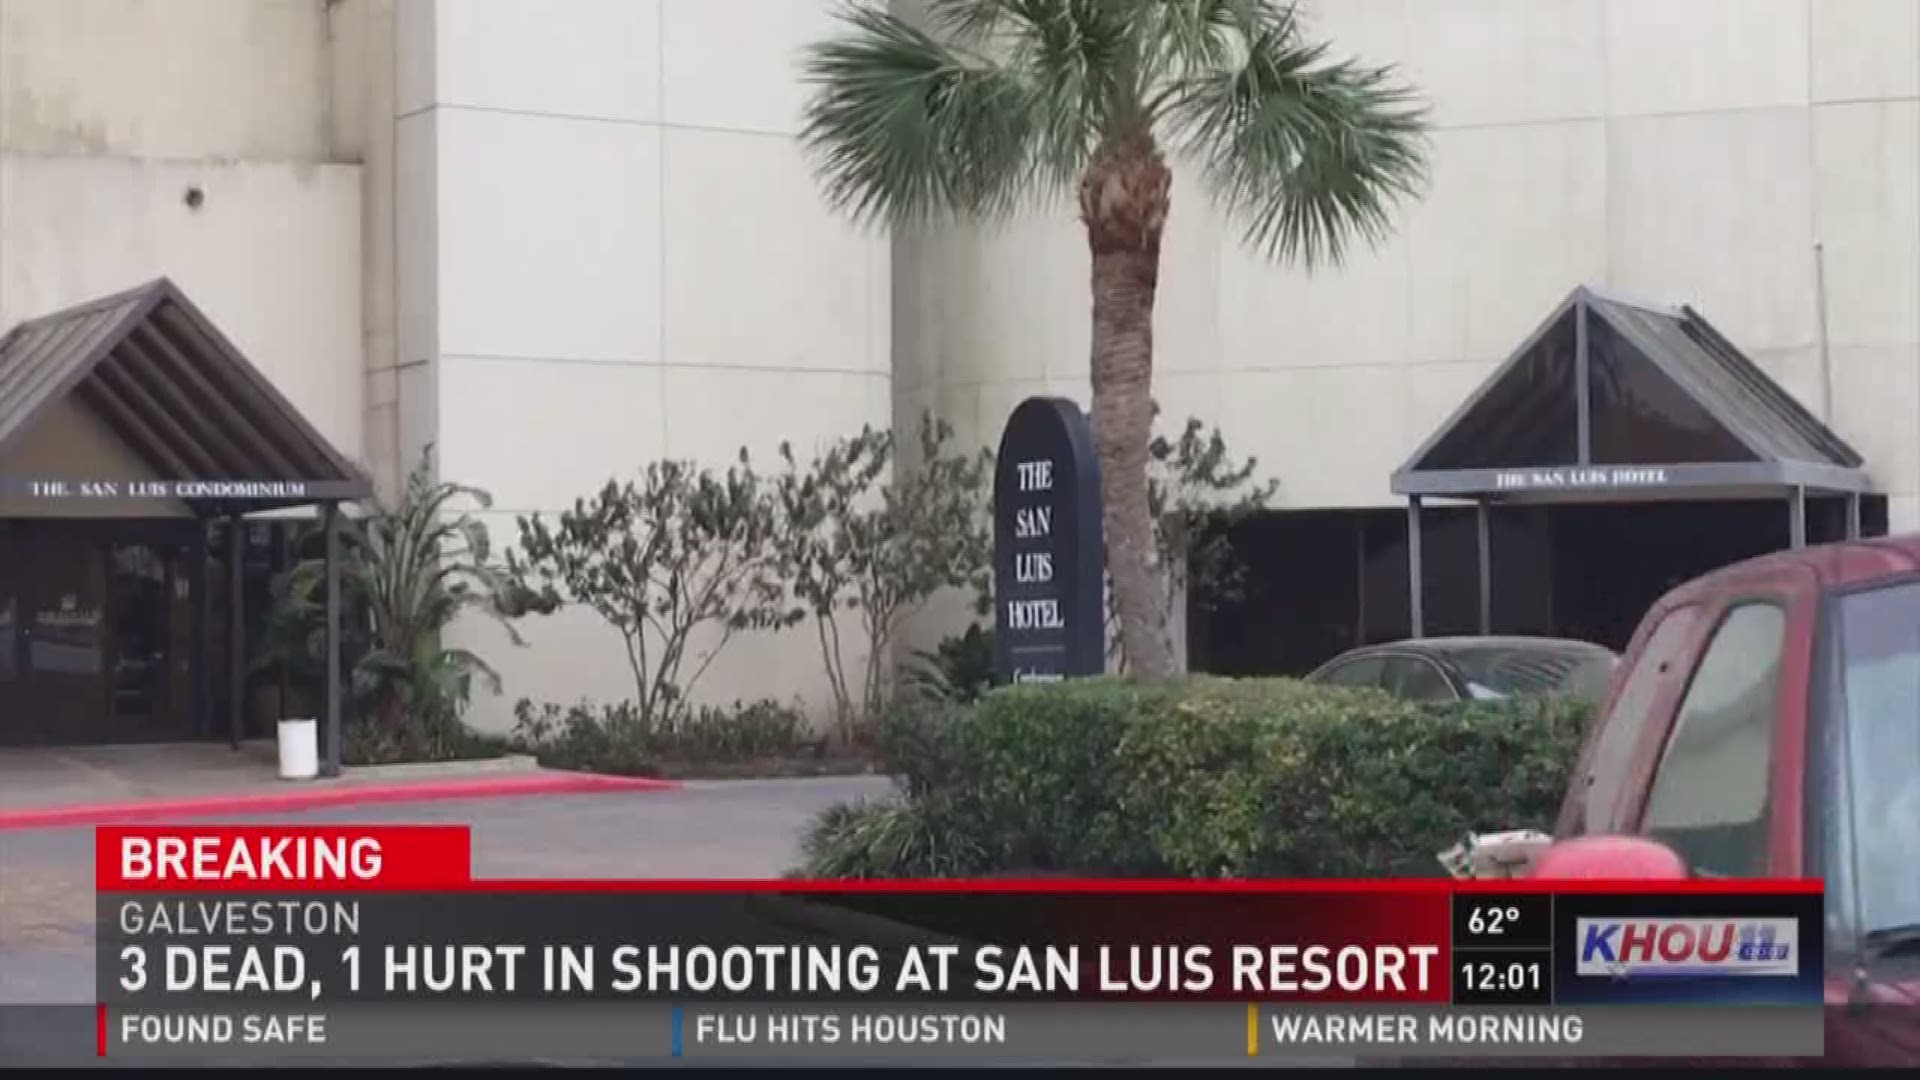 Police are investigating a possible murder-suicide at the San Luis Hotel early Monday that left three dead in Galveston.